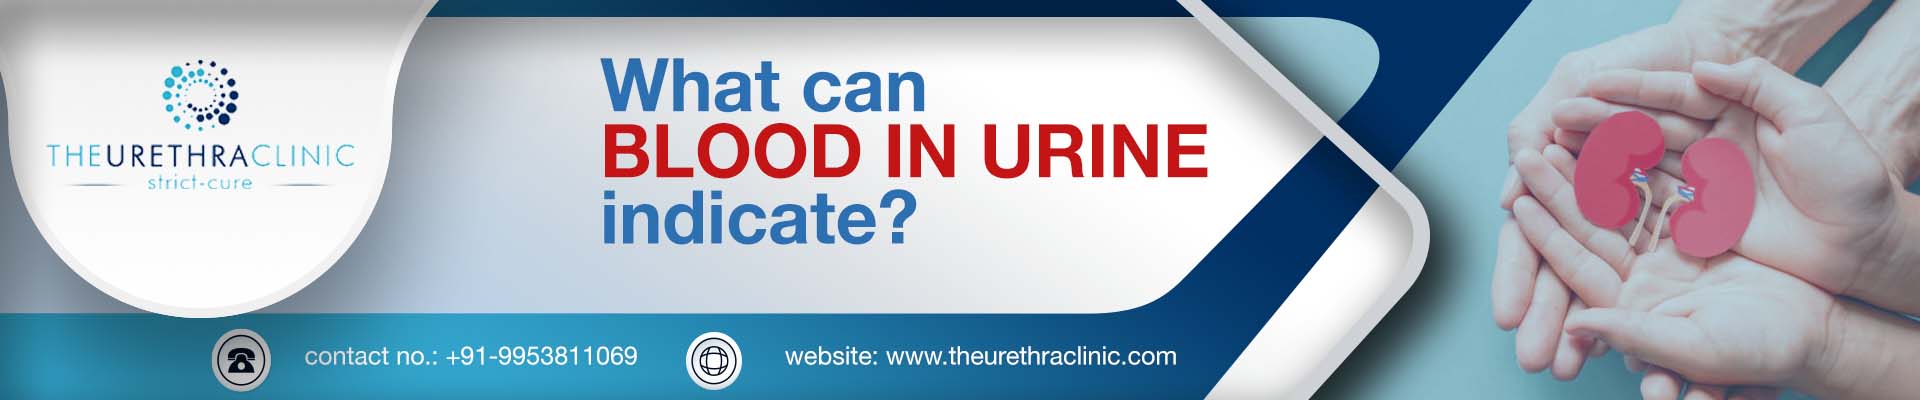 Hematuria - What Does Blood In Urine Indicate